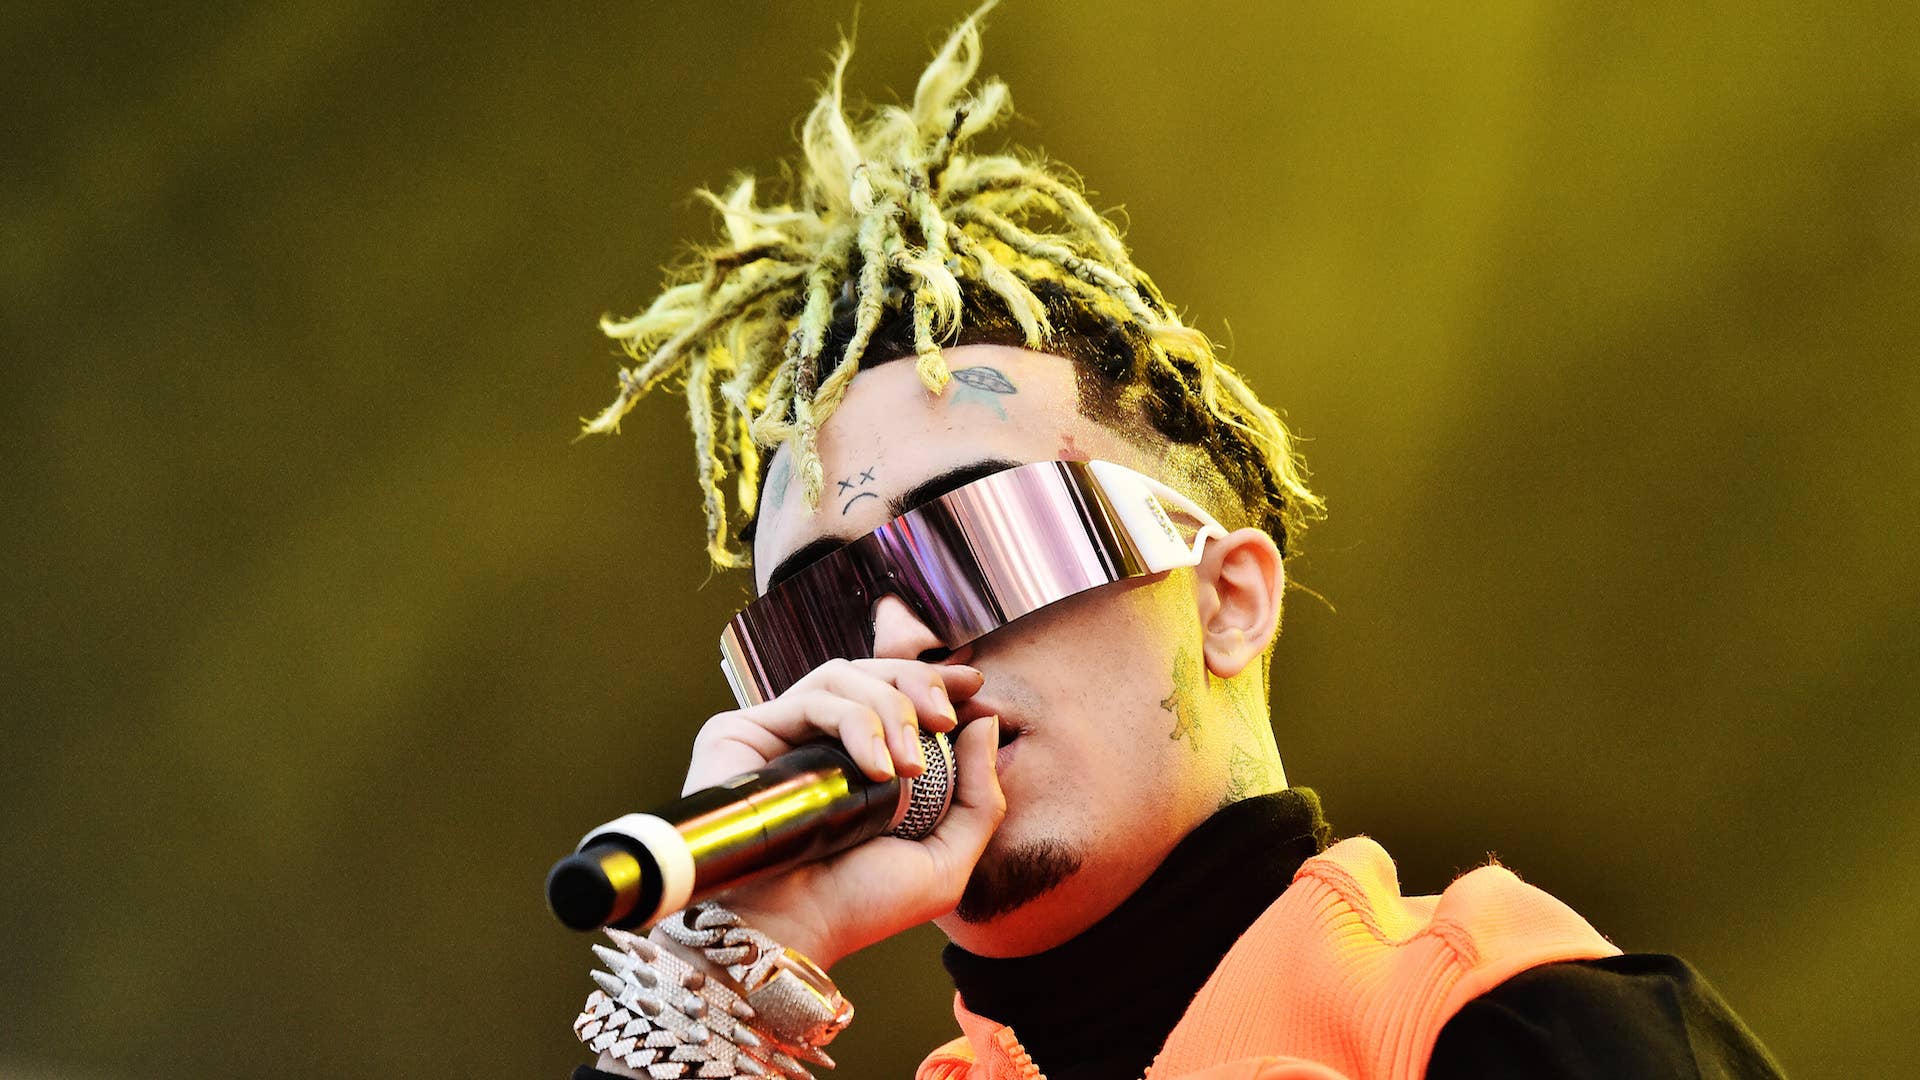 Lil Pump performs during the 2019 Rolling Loud music festival